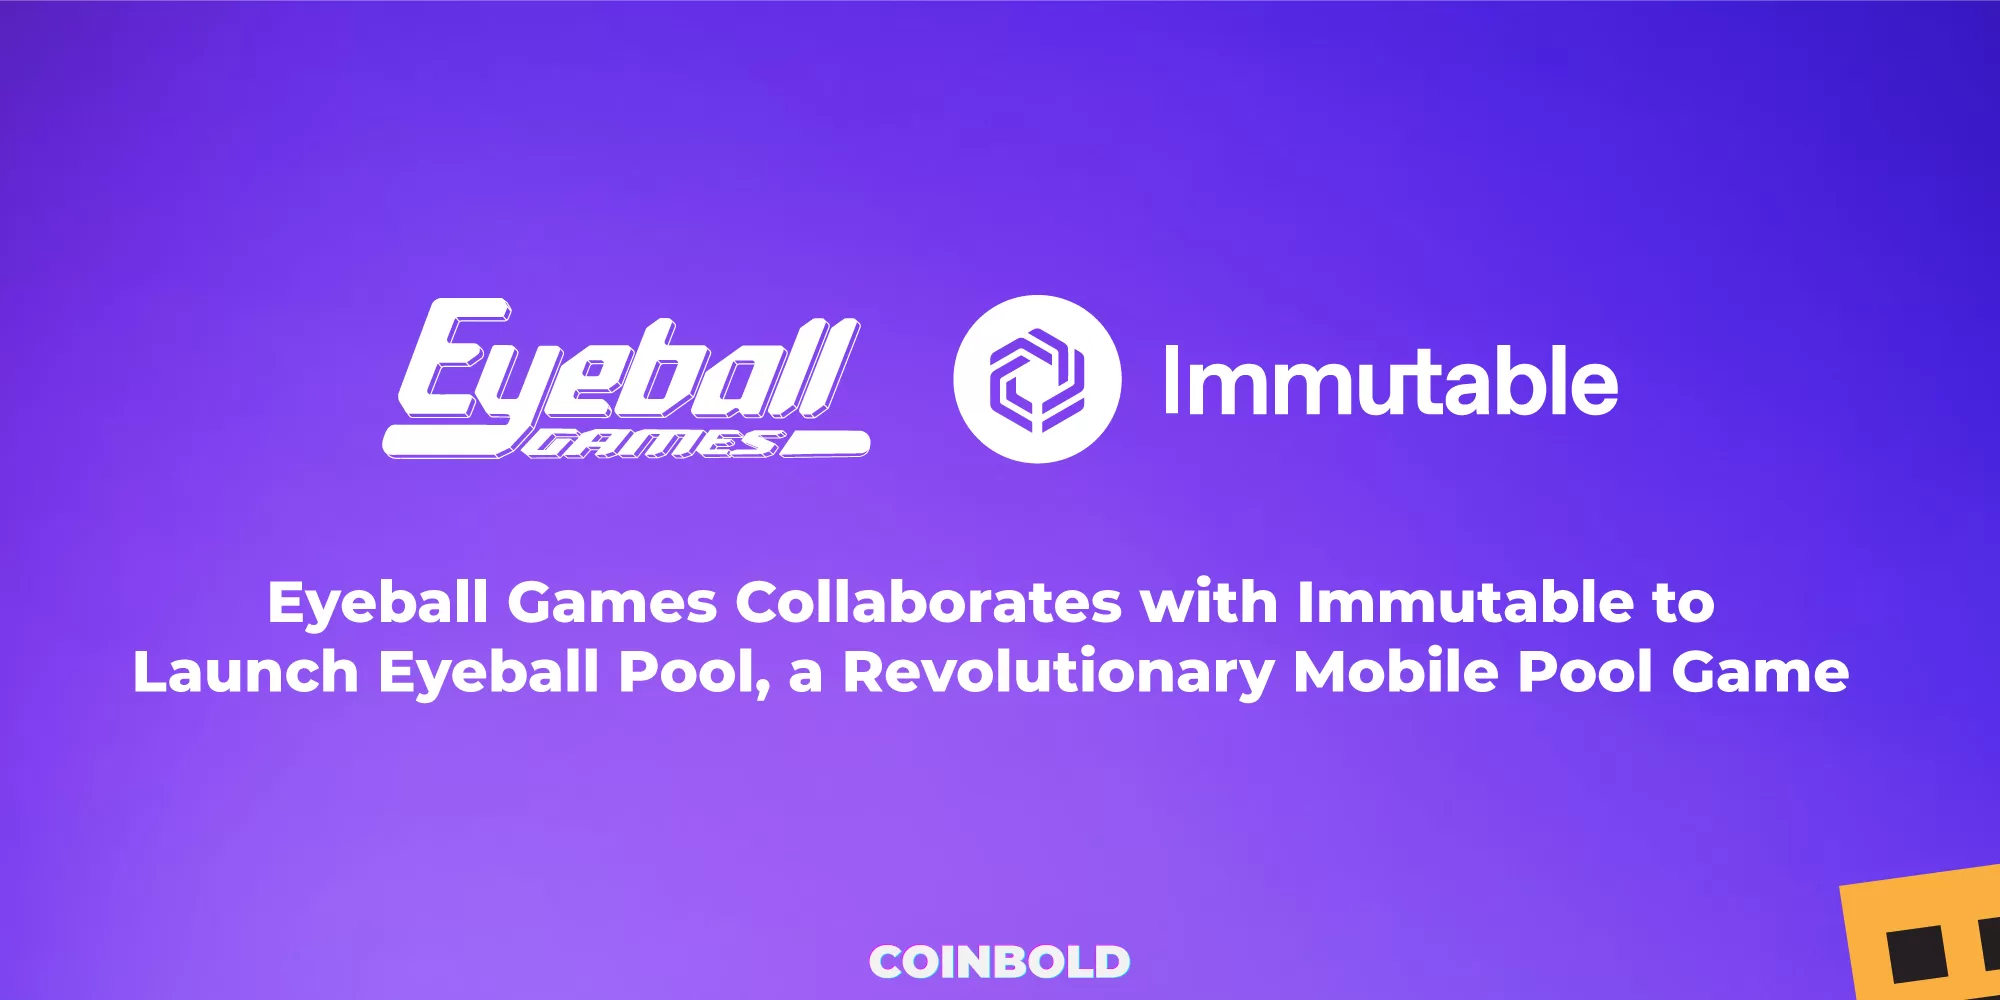 Eyeball Games Collaborates with Immutable to Launch Eyeball Pool, a Revolutionary Mobile Pool Game